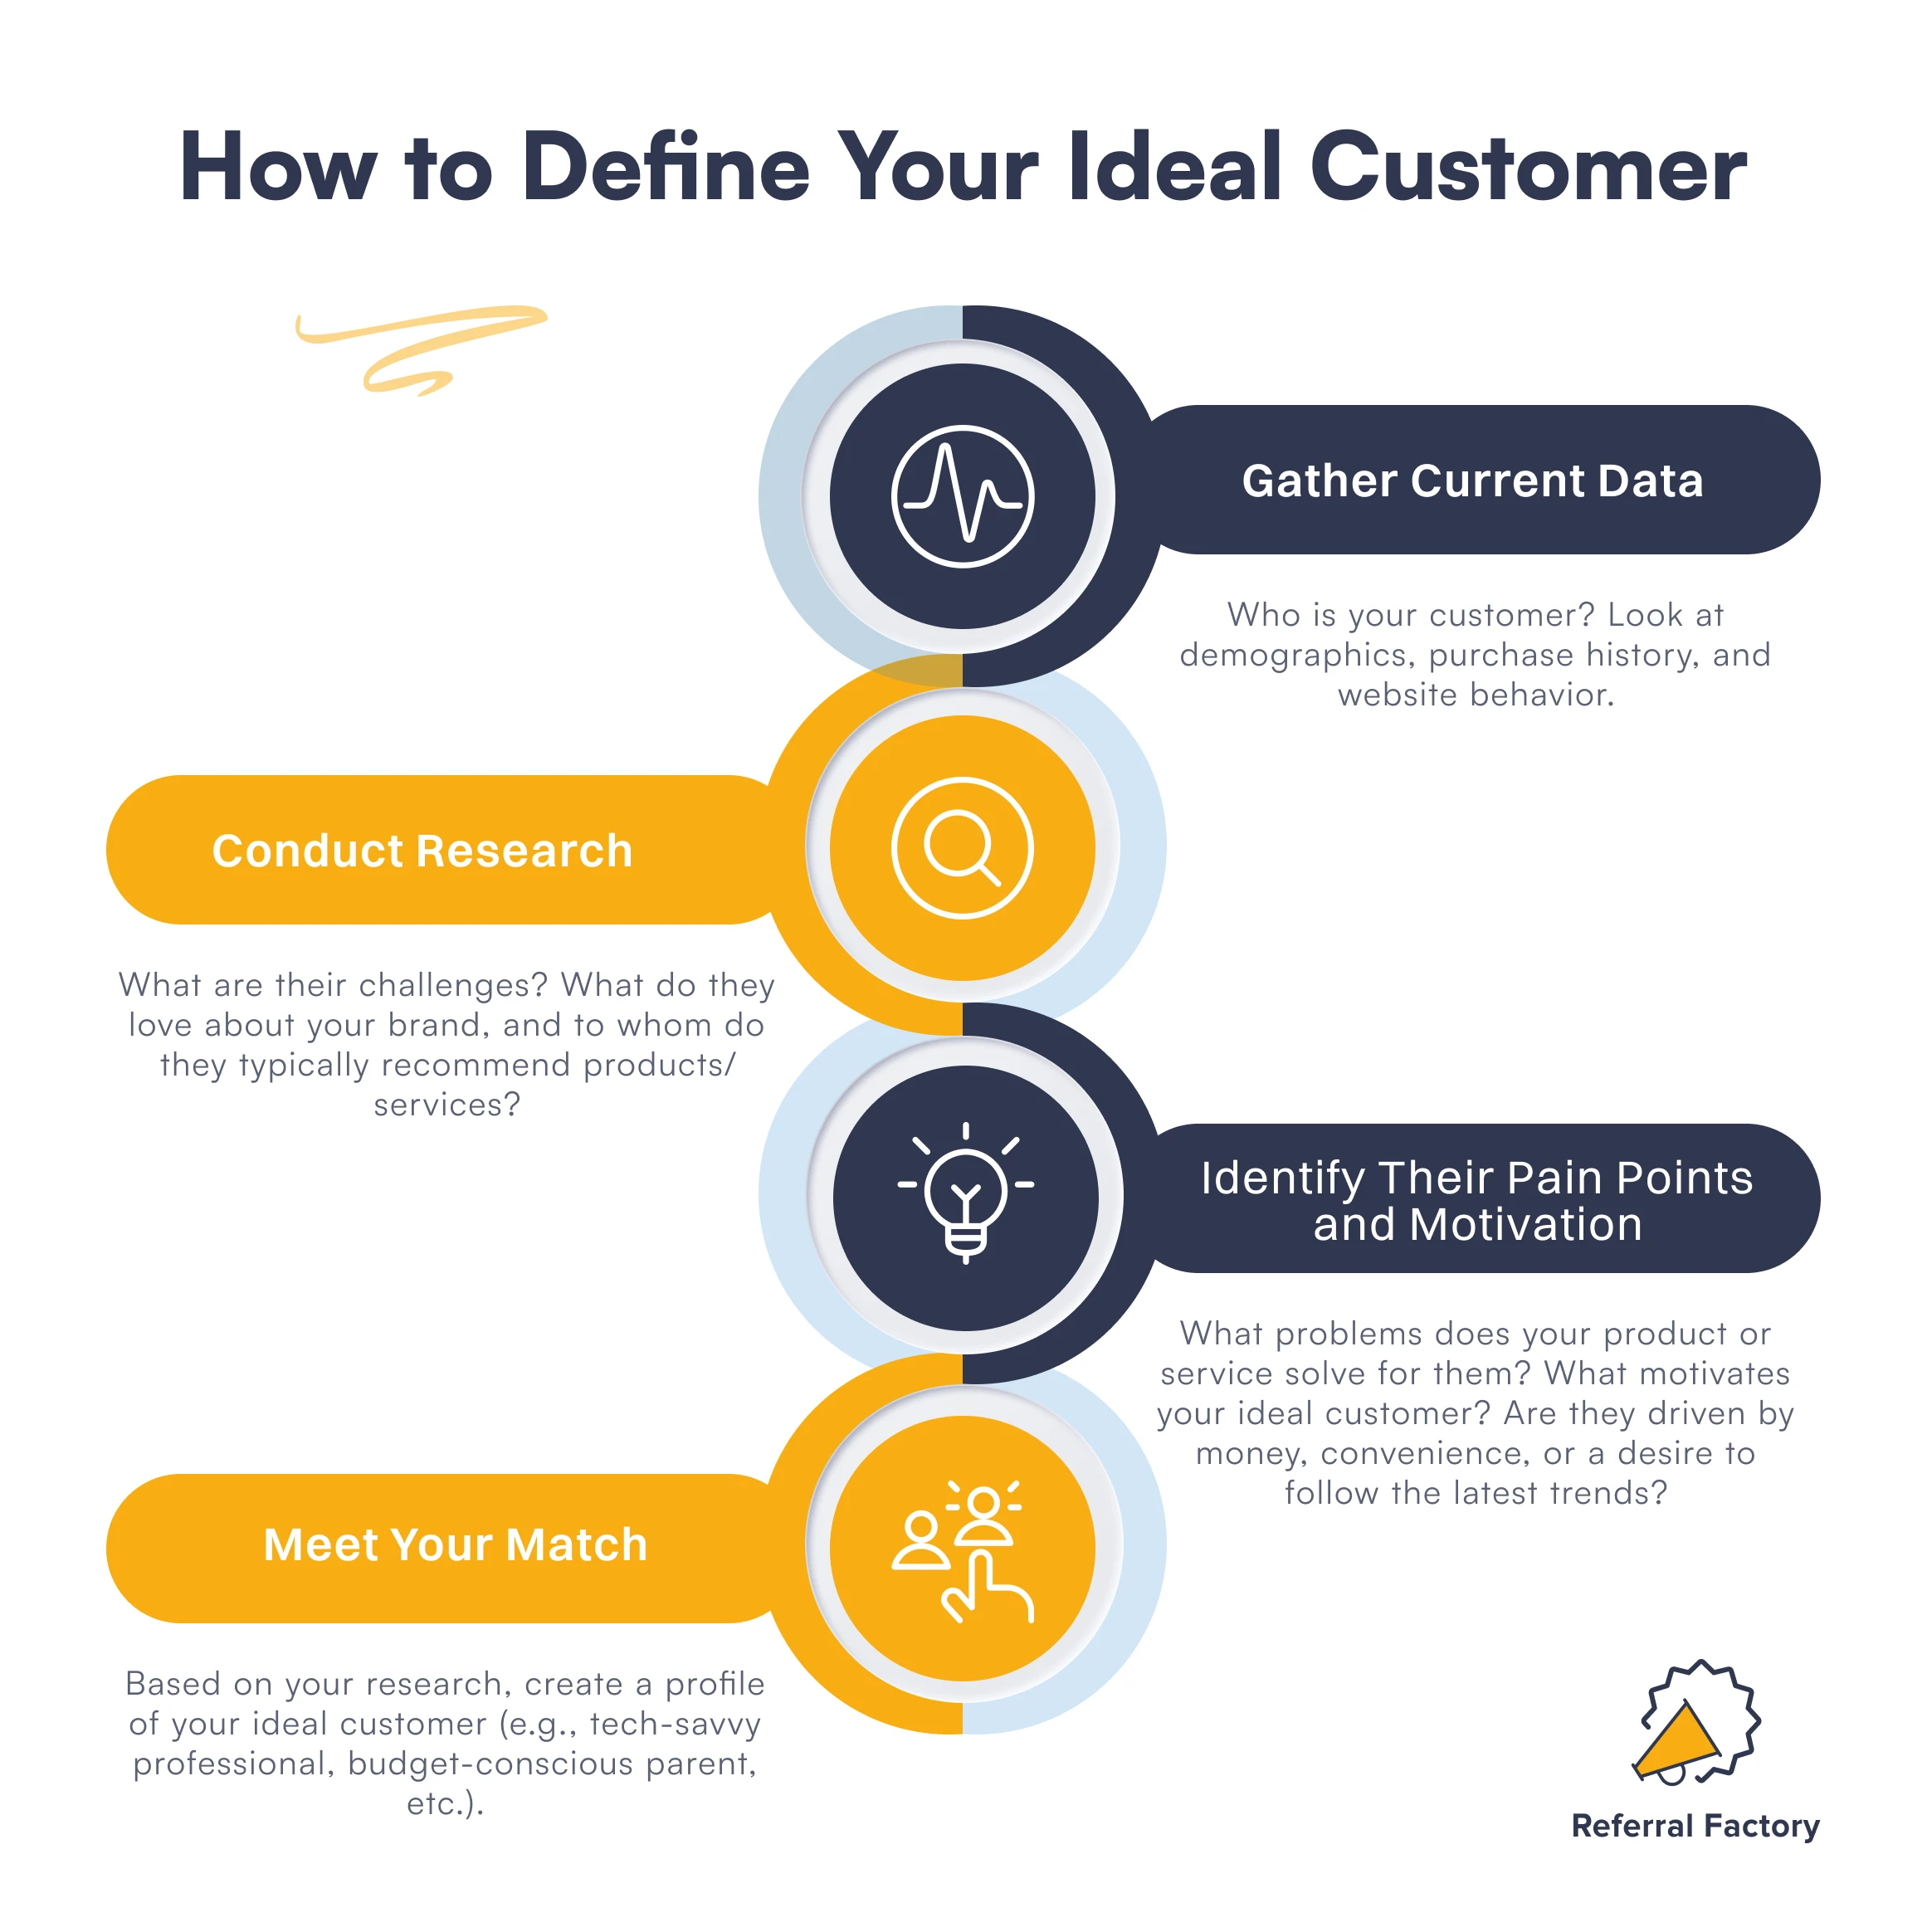 how to define your ideal customer infographic referral factory referral marketing best practices